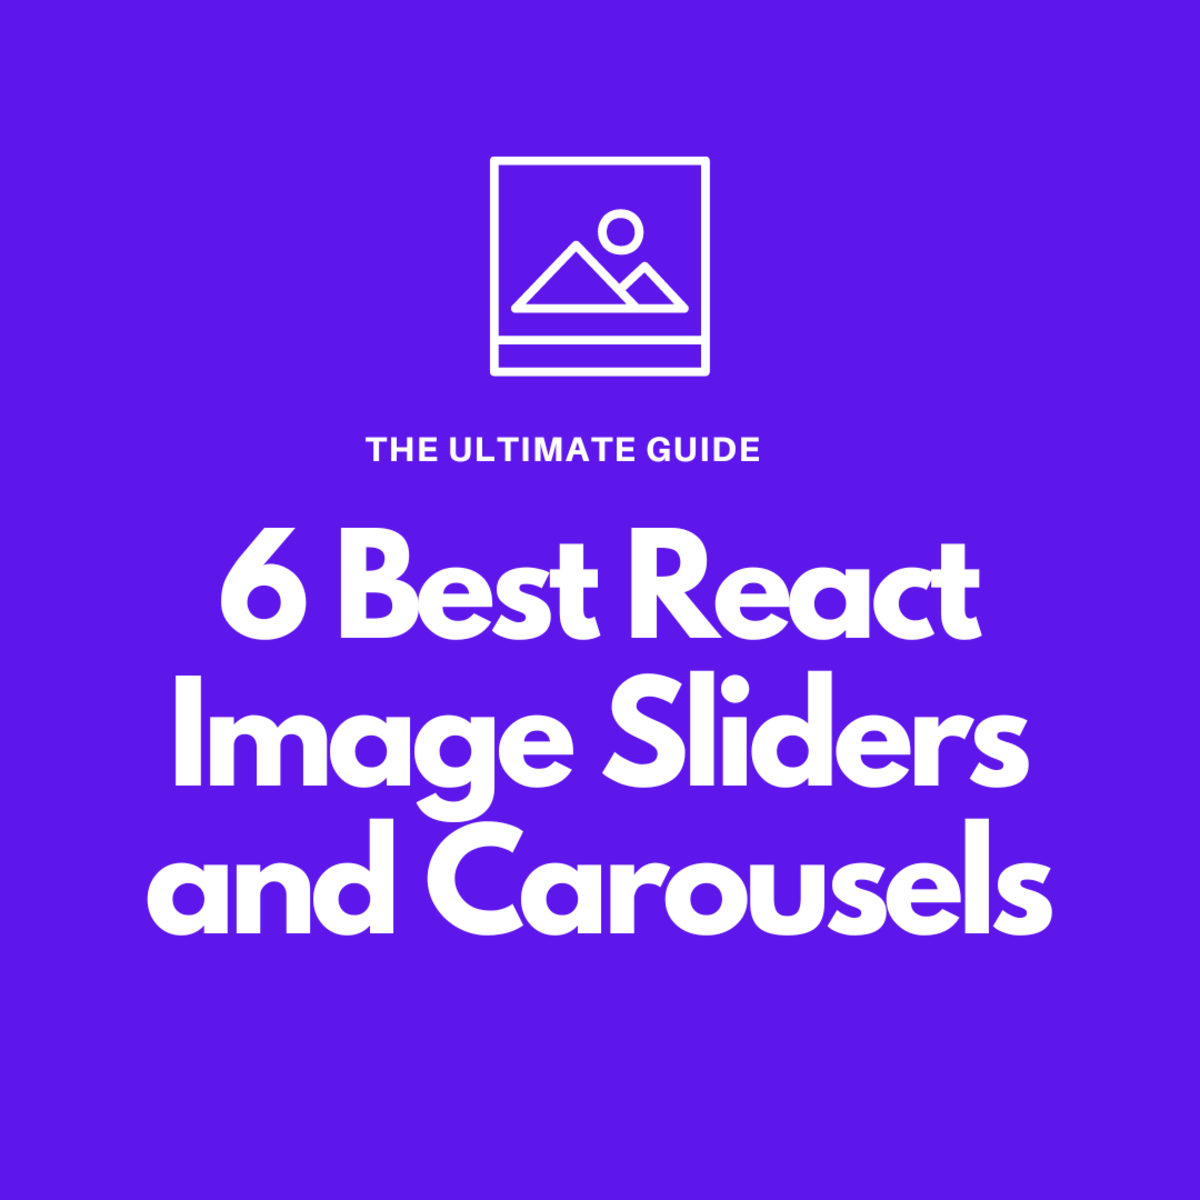 6 Best React Image Sliders to Check Out (The Ultimate List)